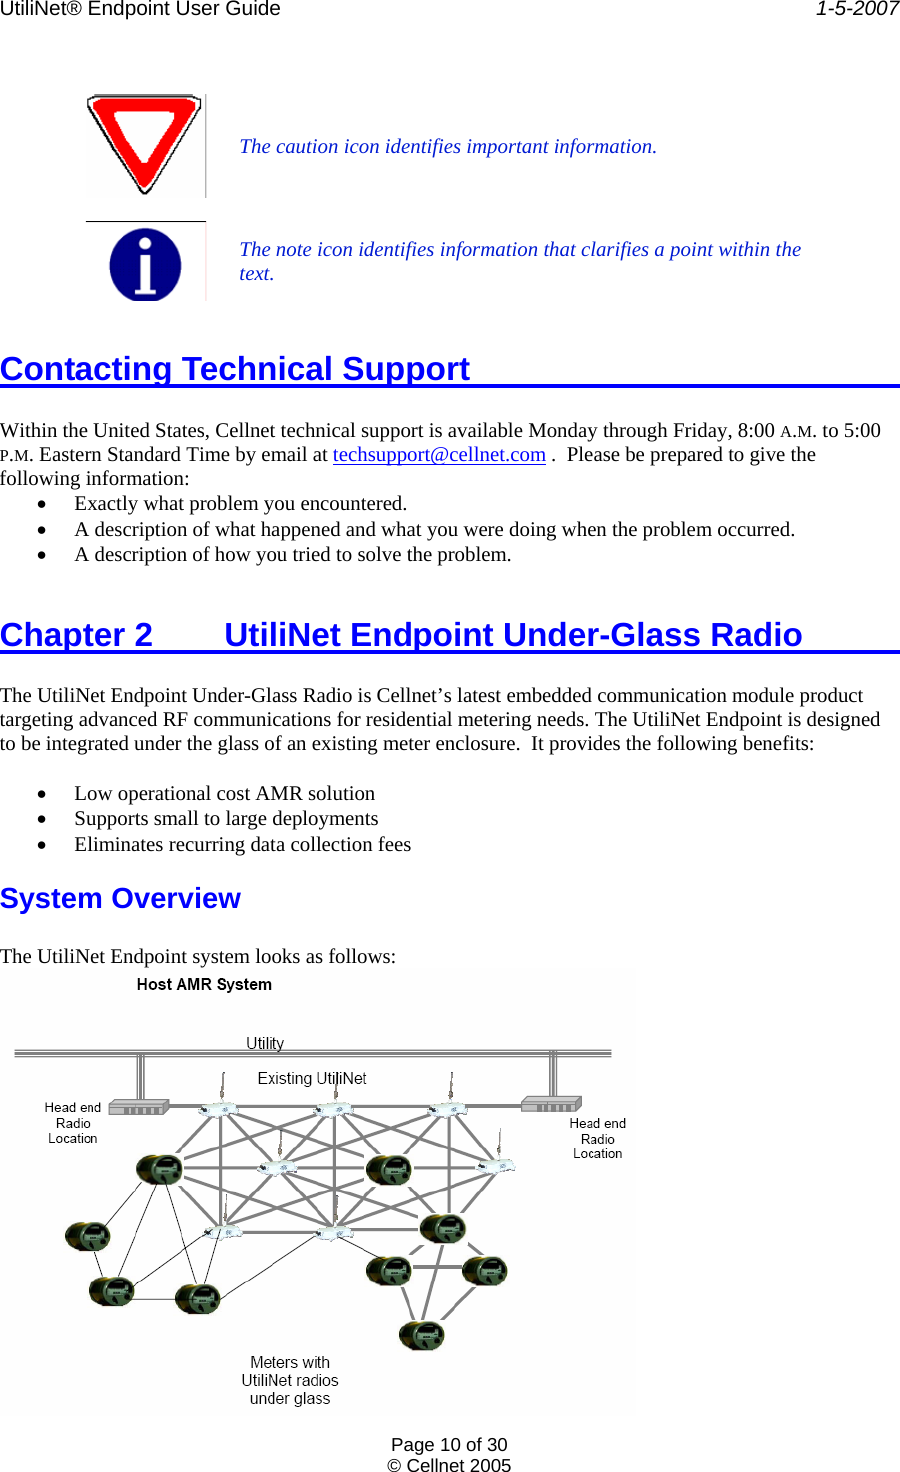 UtiliNet® Endpoint User Guide    1-5-2007 Page 10 of 30 © Cellnet 2005    The caution icon identifies important information.   The note icon identifies information that clarifies a point within the text.  Contacting Technical Support        Within the United States, Cellnet technical support is available Monday through Friday, 8:00 A.M. to 5:00 P.M. Eastern Standard Time by email at techsupport@cellnet.com .  Please be prepared to give the following information: • Exactly what problem you encountered. • A description of what happened and what you were doing when the problem occurred. • A description of how you tried to solve the problem.  Chapter 2  UtiliNet Endpoint Under-Glass Radio      The UtiliNet Endpoint Under-Glass Radio is Cellnet’s latest embedded communication module product targeting advanced RF communications for residential metering needs. The UtiliNet Endpoint is designed to be integrated under the glass of an existing meter enclosure.  It provides the following benefits:  • Low operational cost AMR solution • Supports small to large deployments • Eliminates recurring data collection fees System Overview  The UtiliNet Endpoint system looks as follows:  